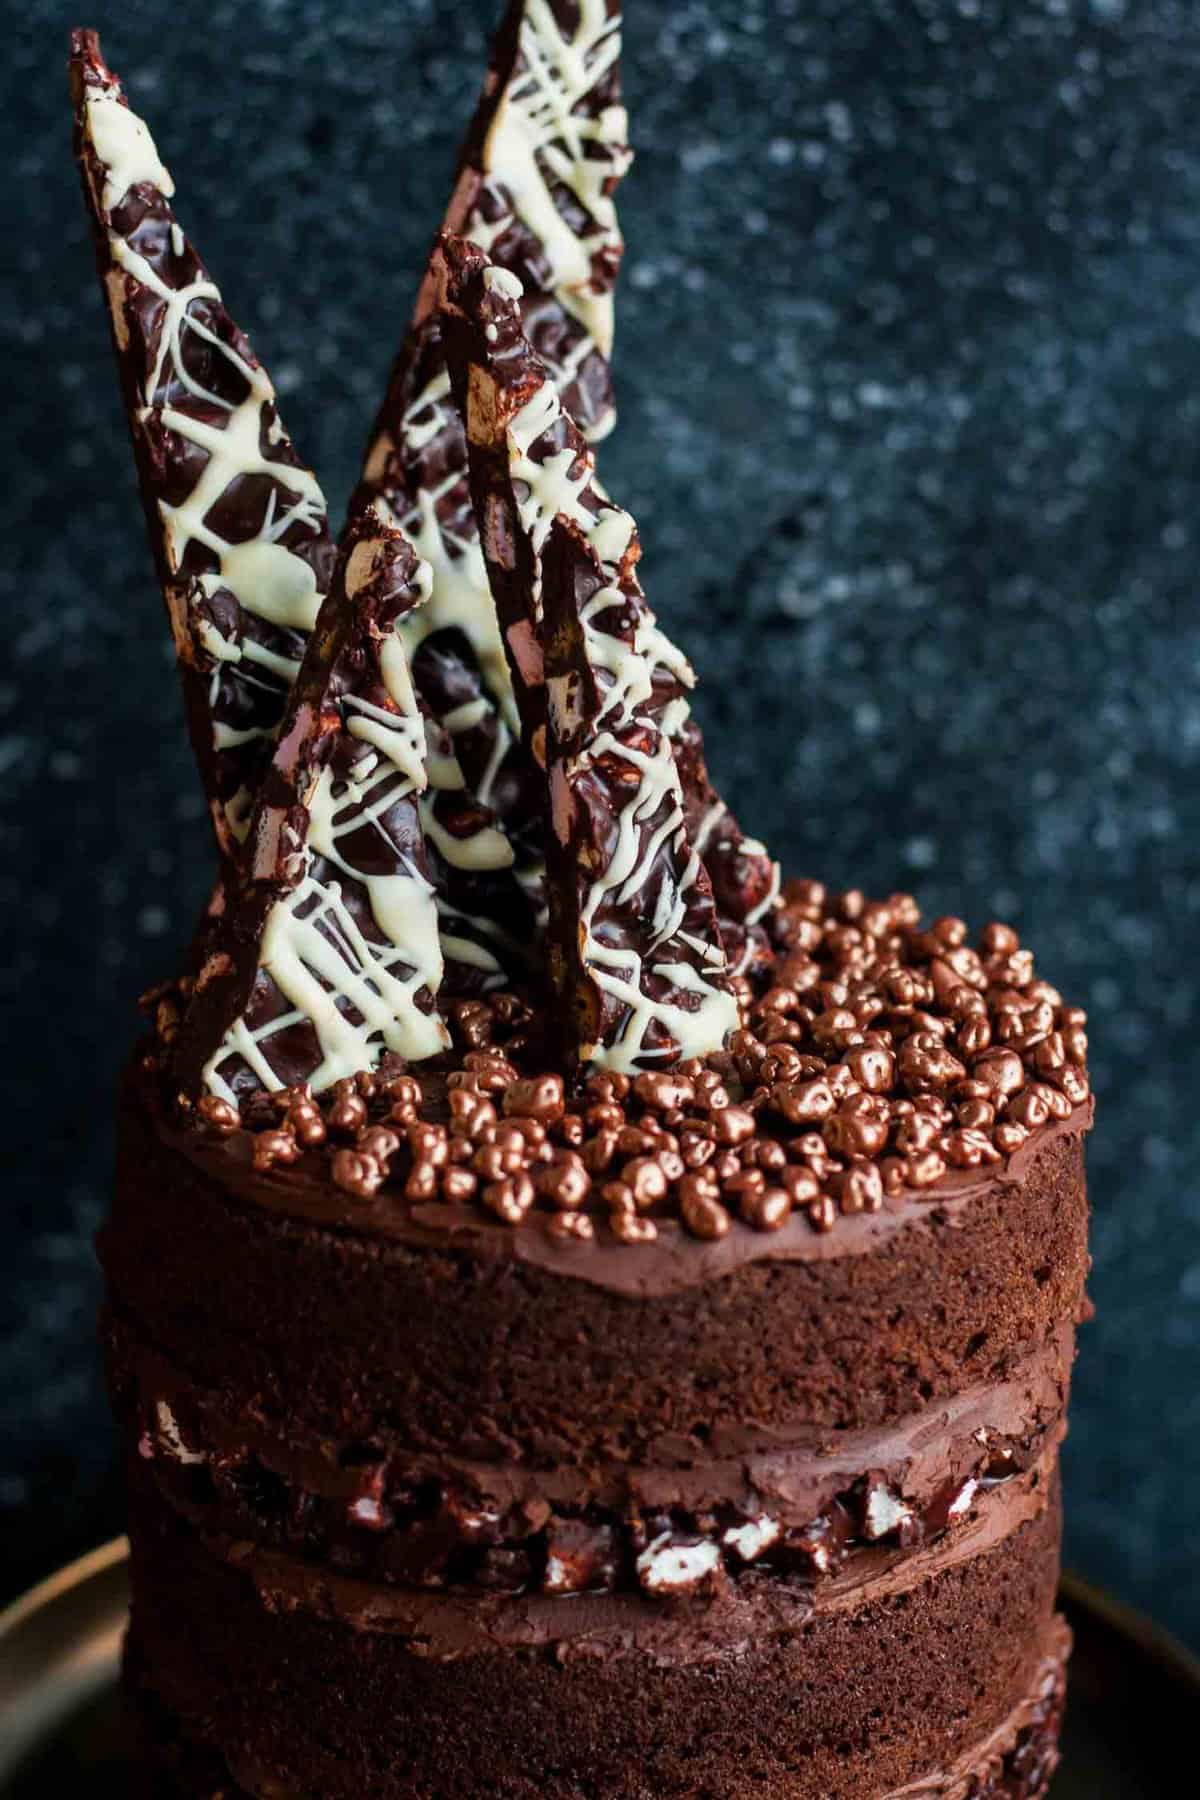 A close up of a chocolate rocky road shards on top of a cake.